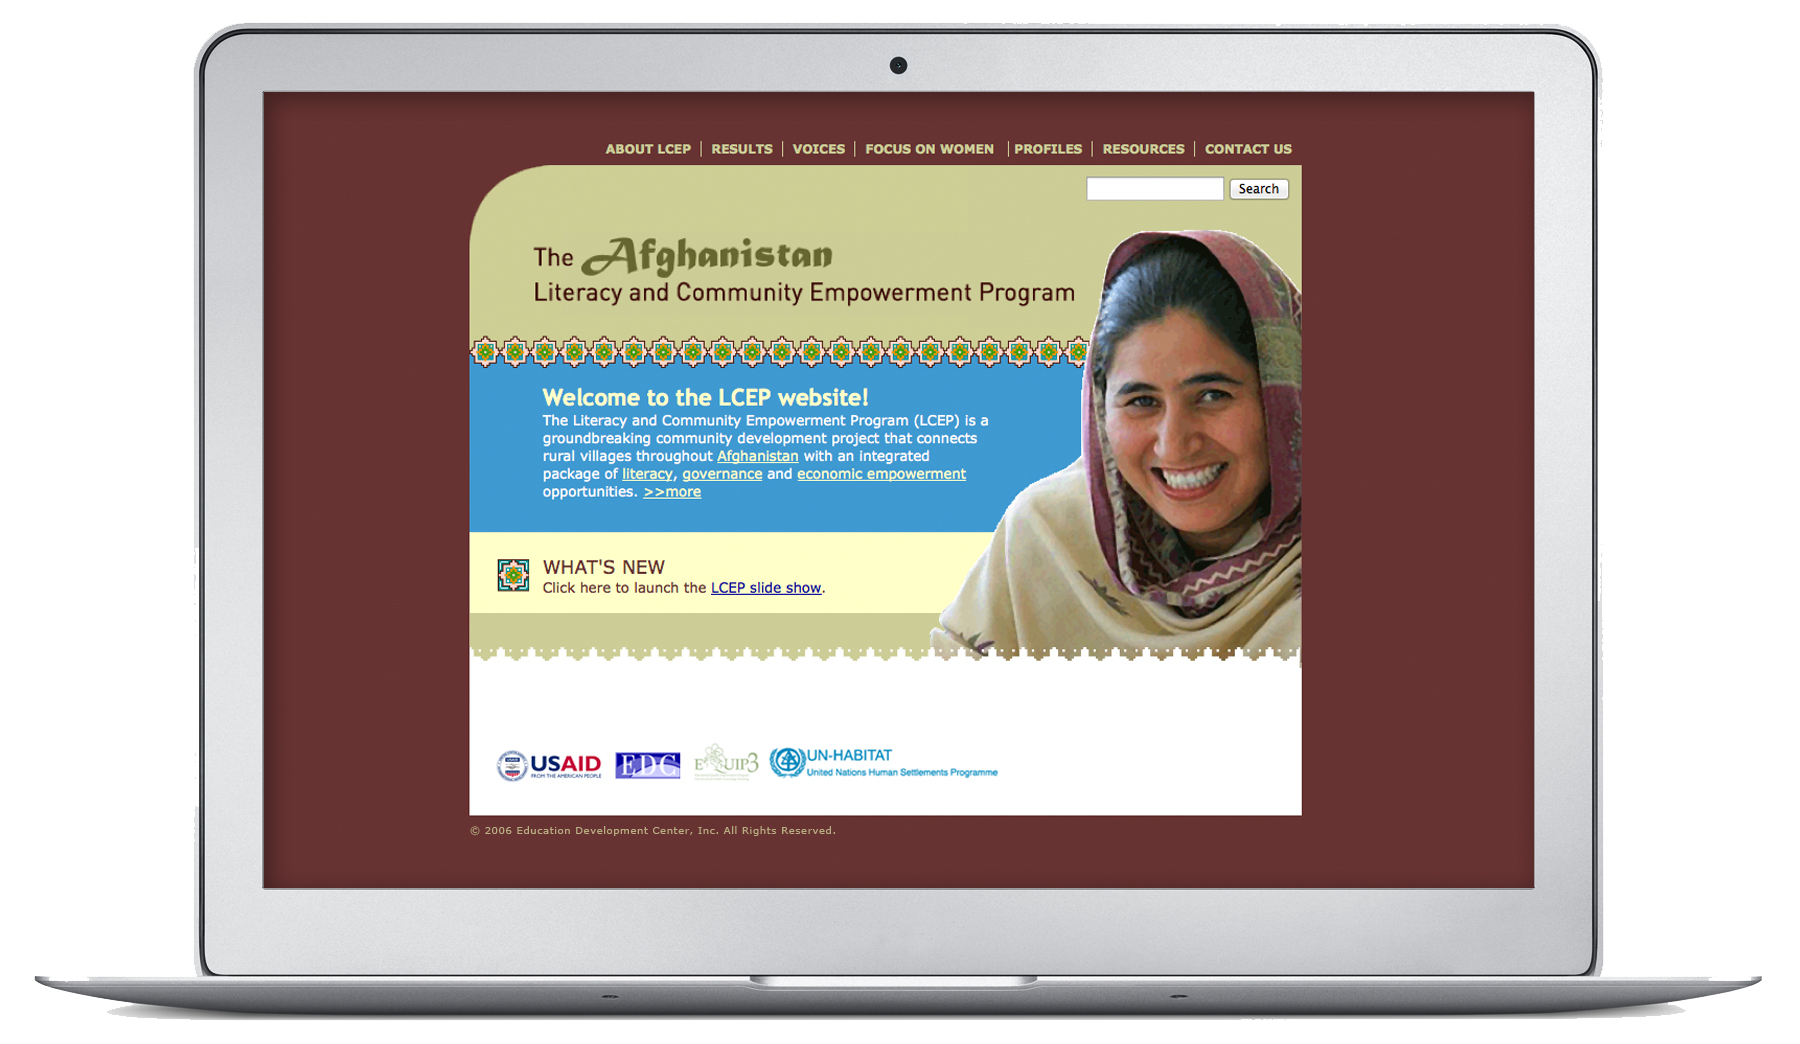 The Afghanistan Literacy and Community Empowerment Program